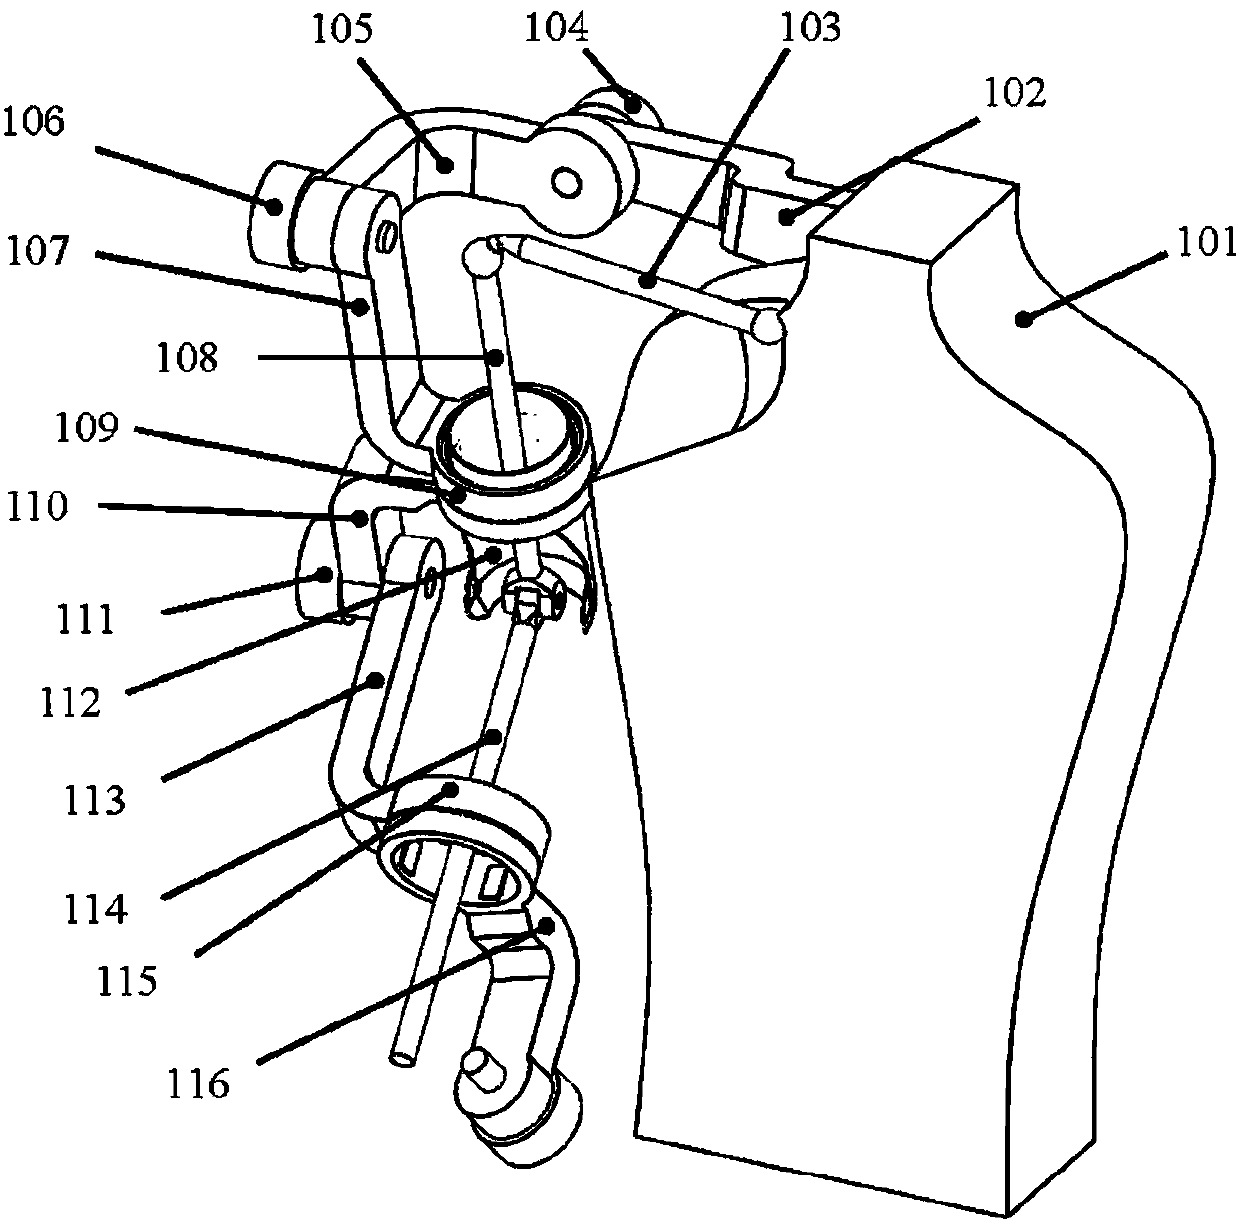 A method and device for solving the problem of singular configuration of the shoulder joint of an exoskeleton robot